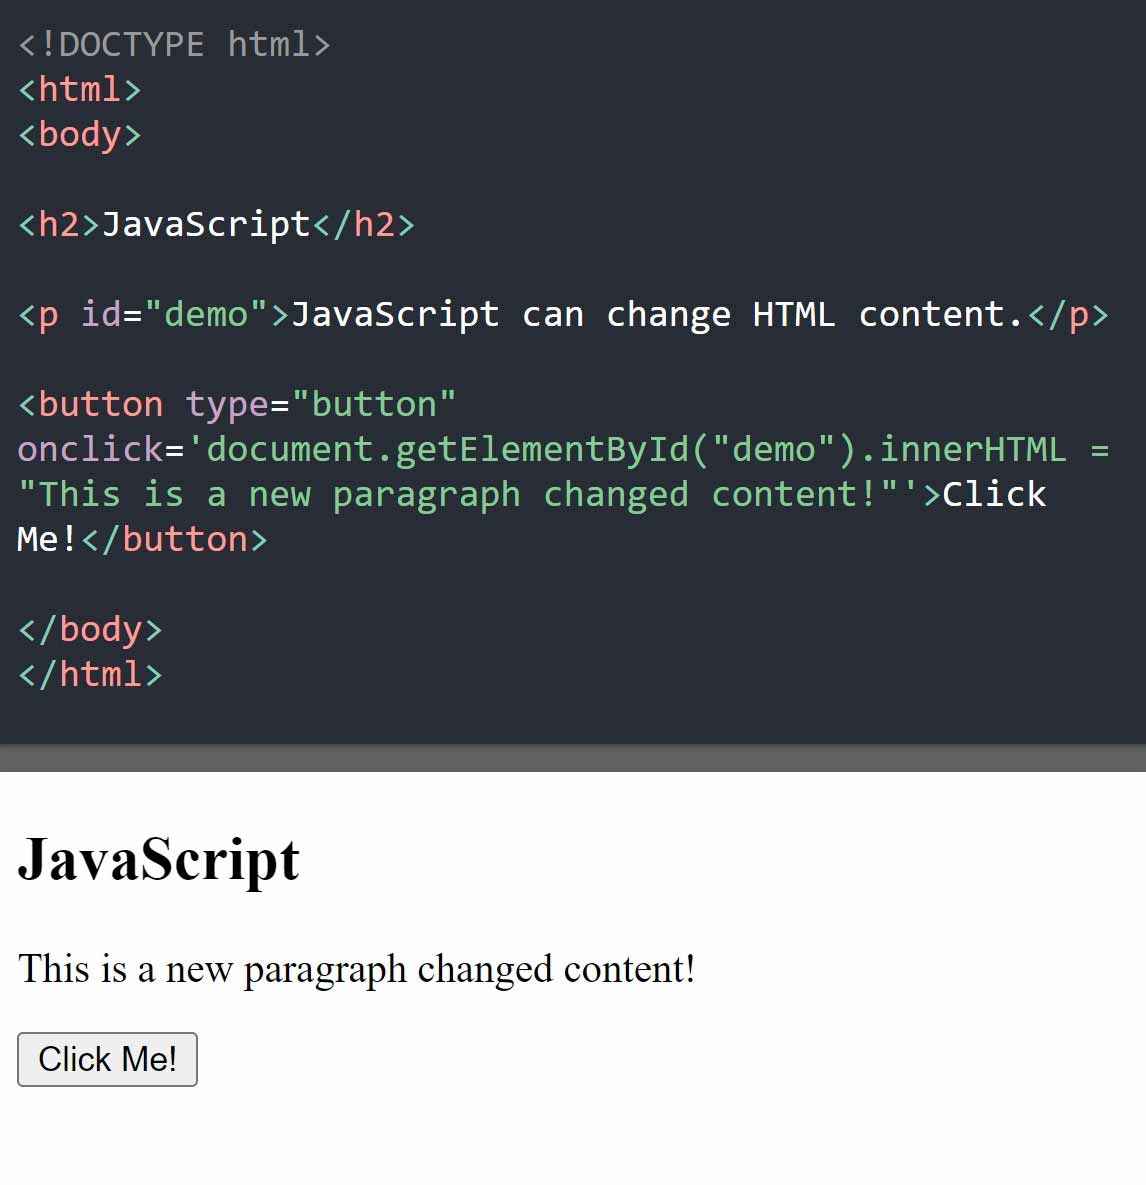 HTML code showing results with changed text when the button is clicked.